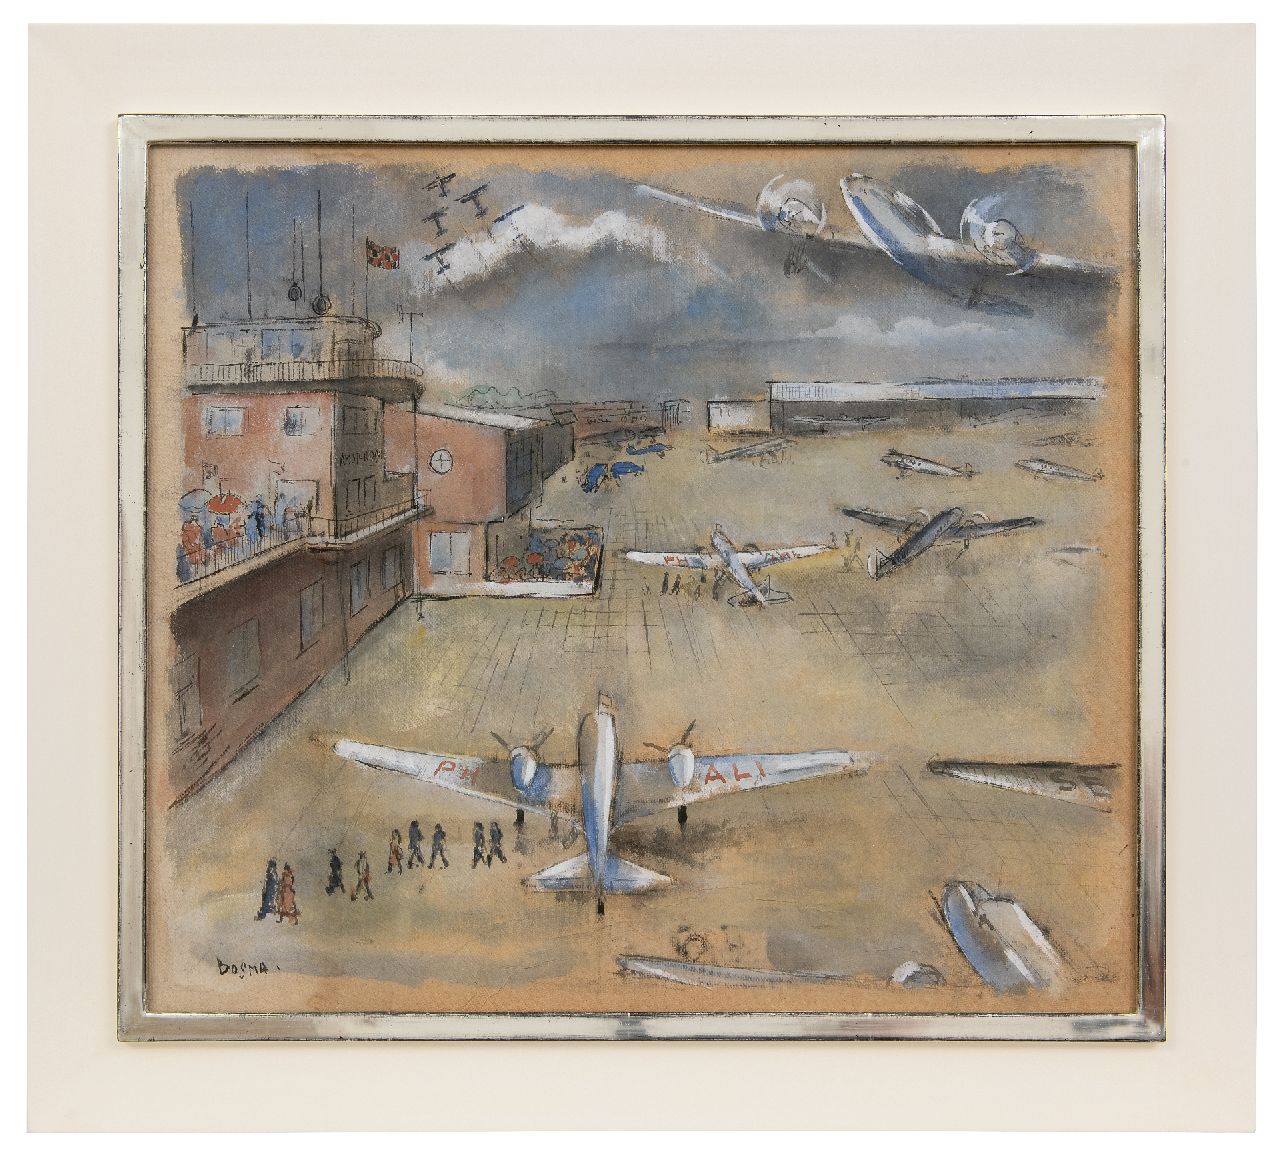 Bosma W.  | Willem 'Wim' Bosma, Airport Schiphol with the KLM Douglas DC-3 'Ibis', chalk and gouache on cardboard 54.4 x 62.0 cm, signed l.l. and executed late 30s